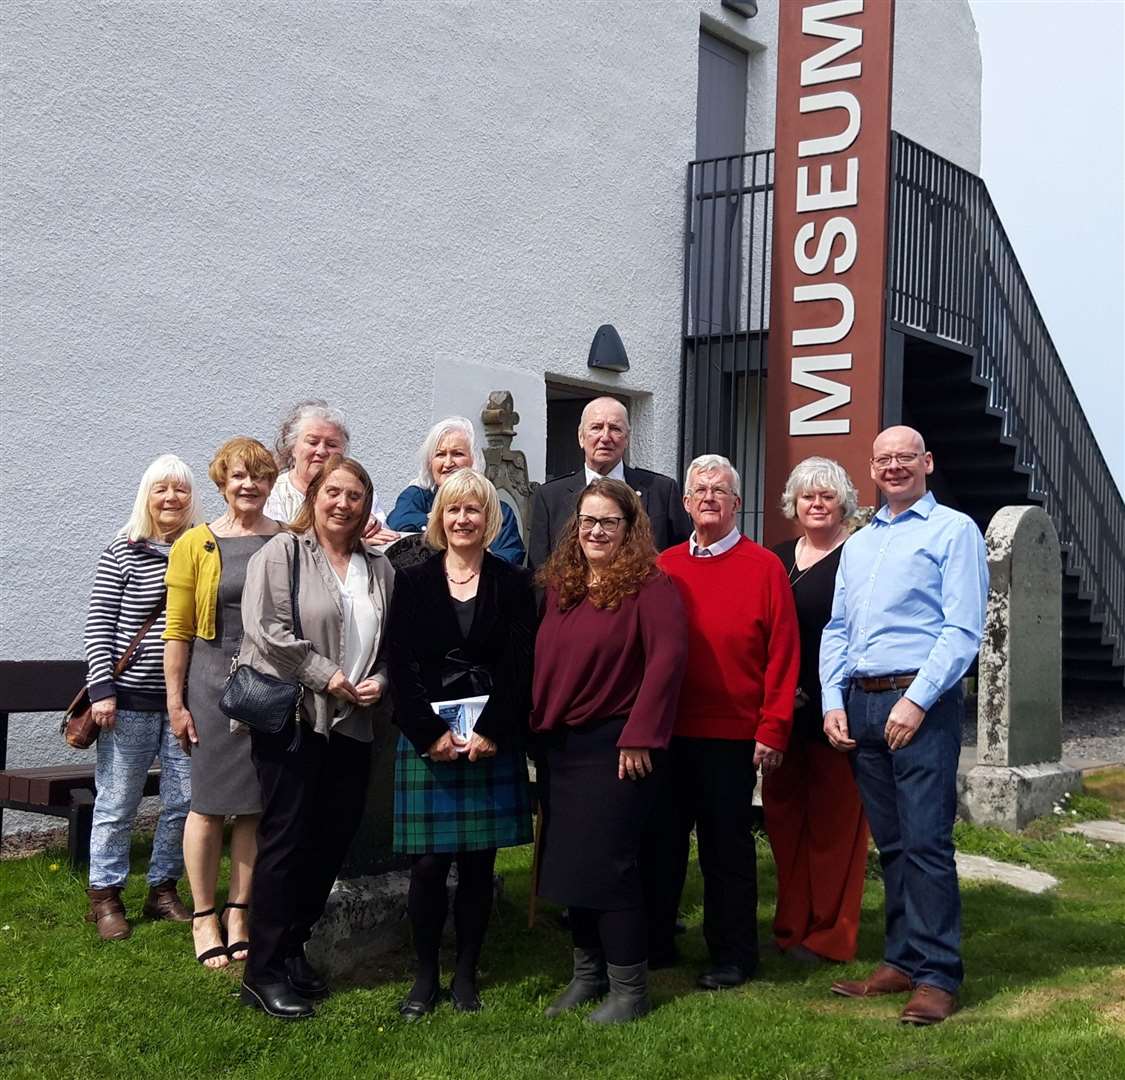 Strathnaver Museum was reopened in 2023 following a £1.2 million refurbishment.